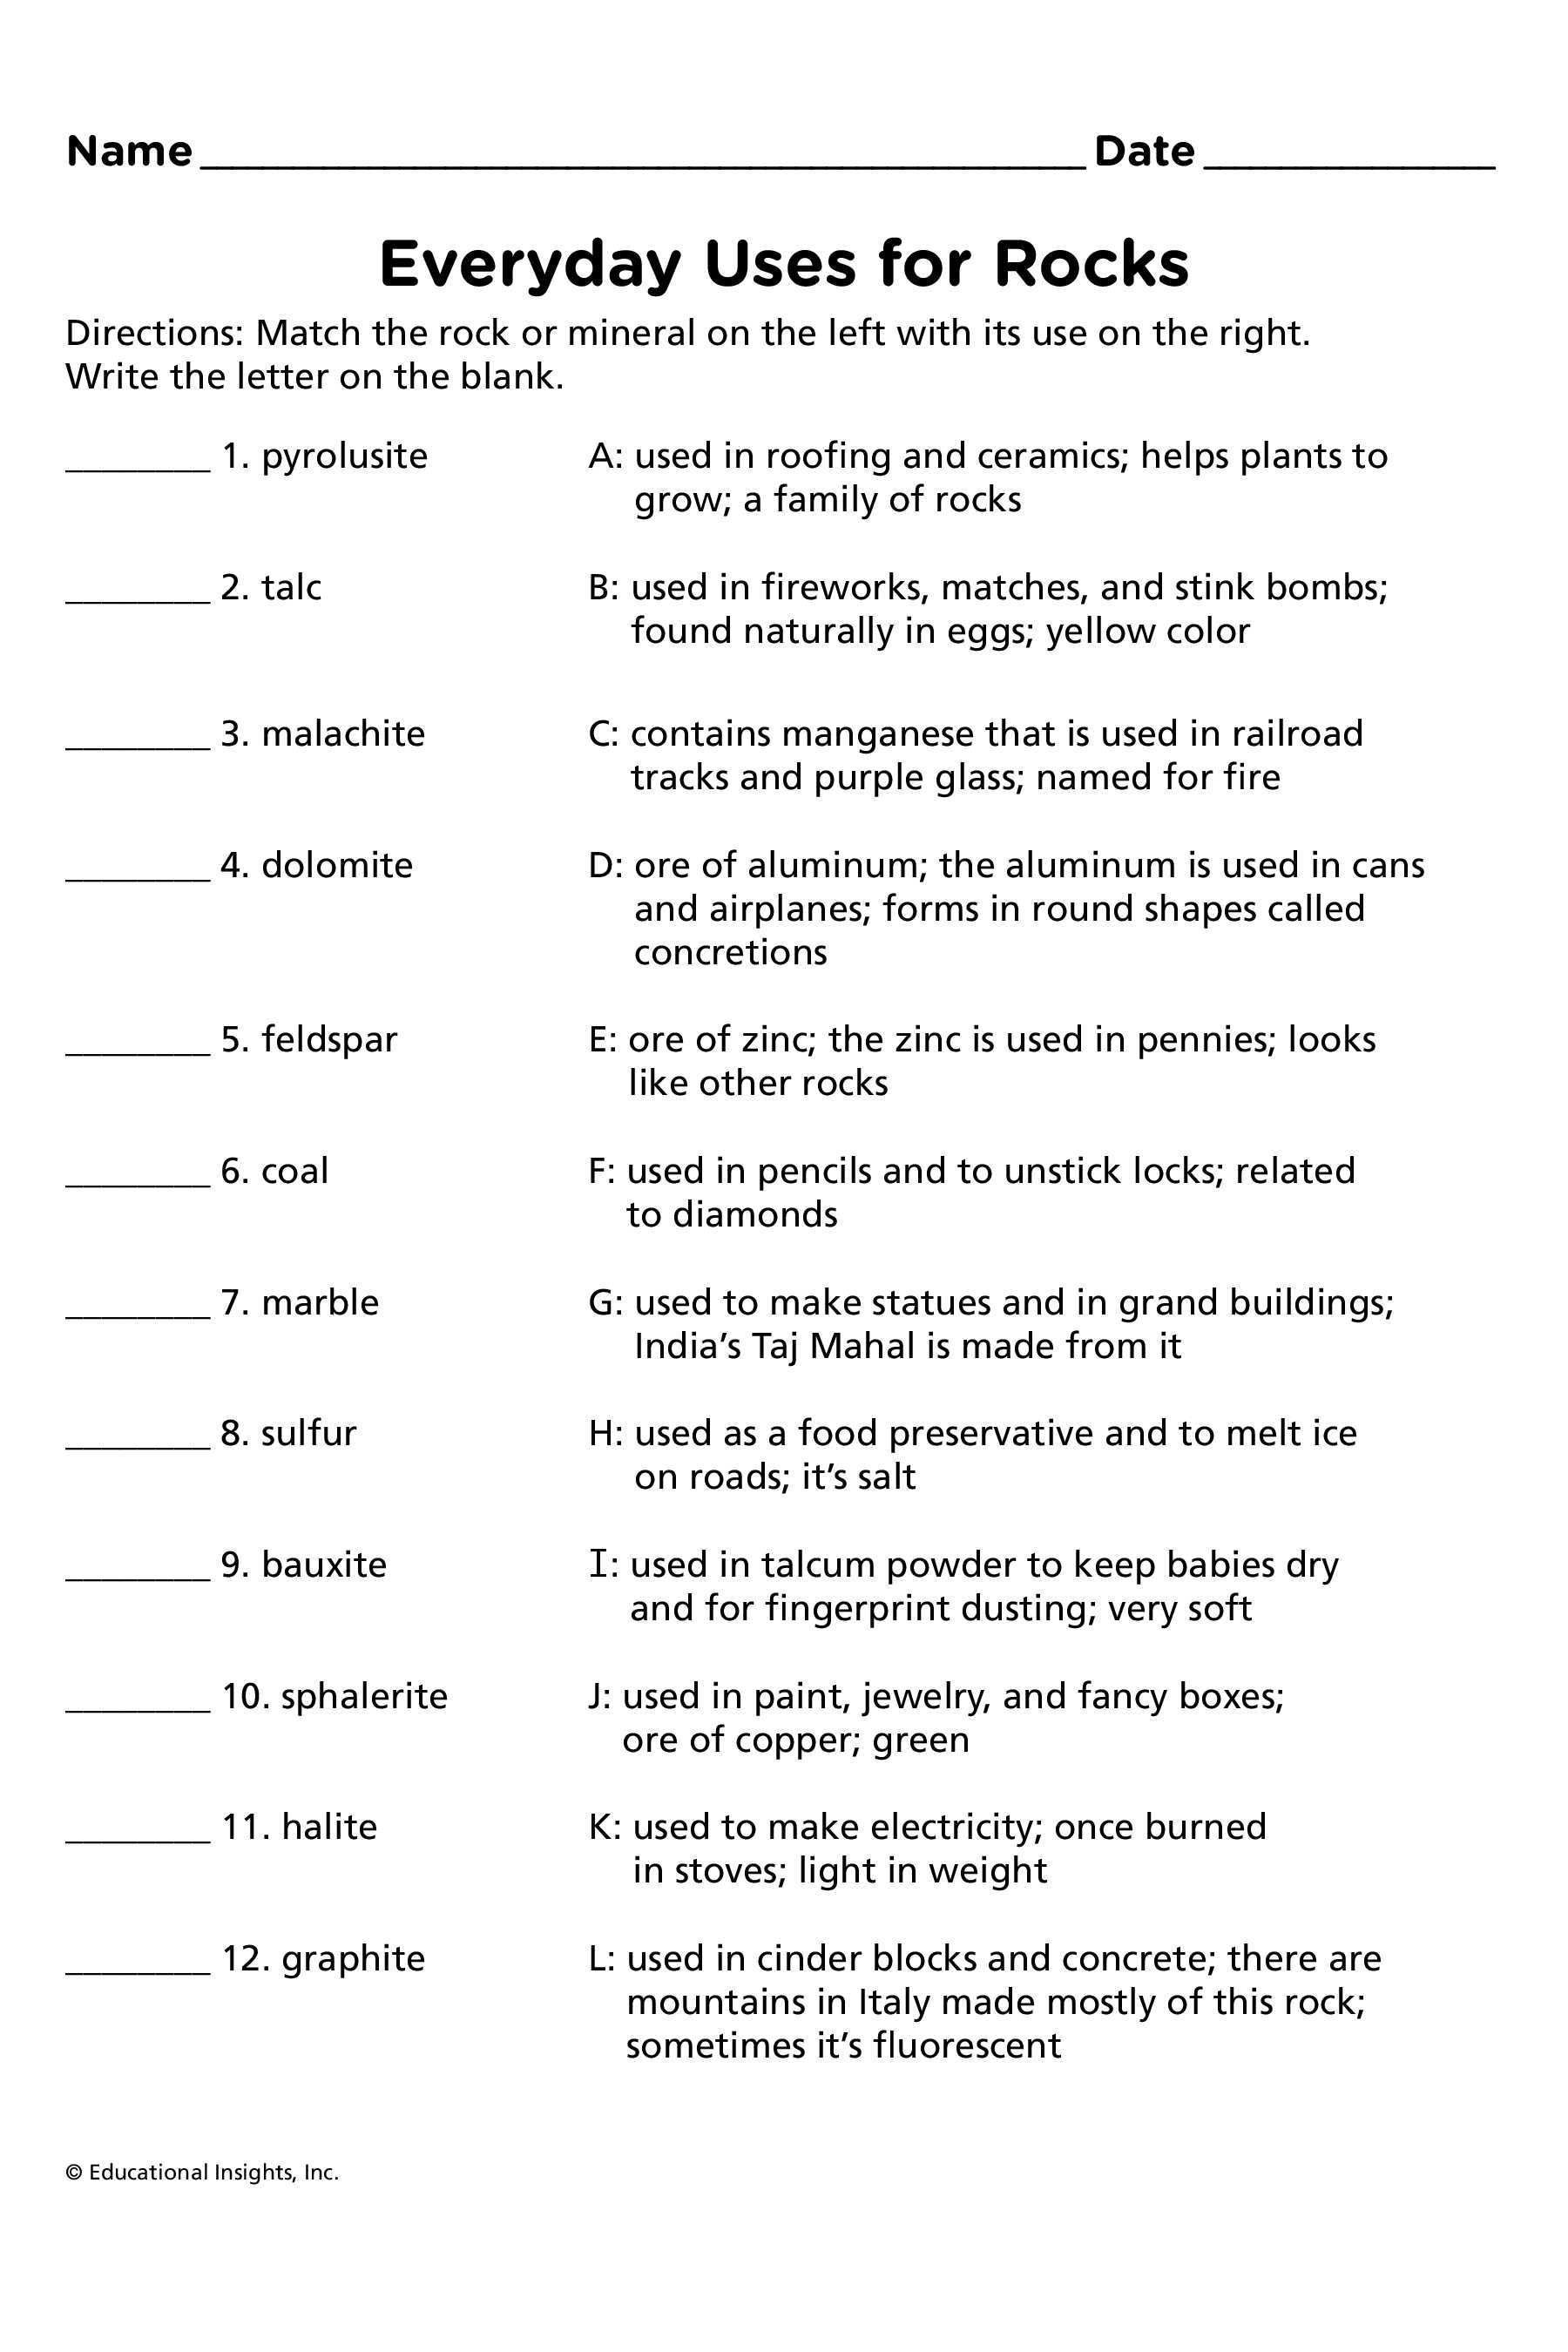 Fingerprint Worksheet Answers together with Worksheets with Answers Best Renaissance Scavenger Hunt and